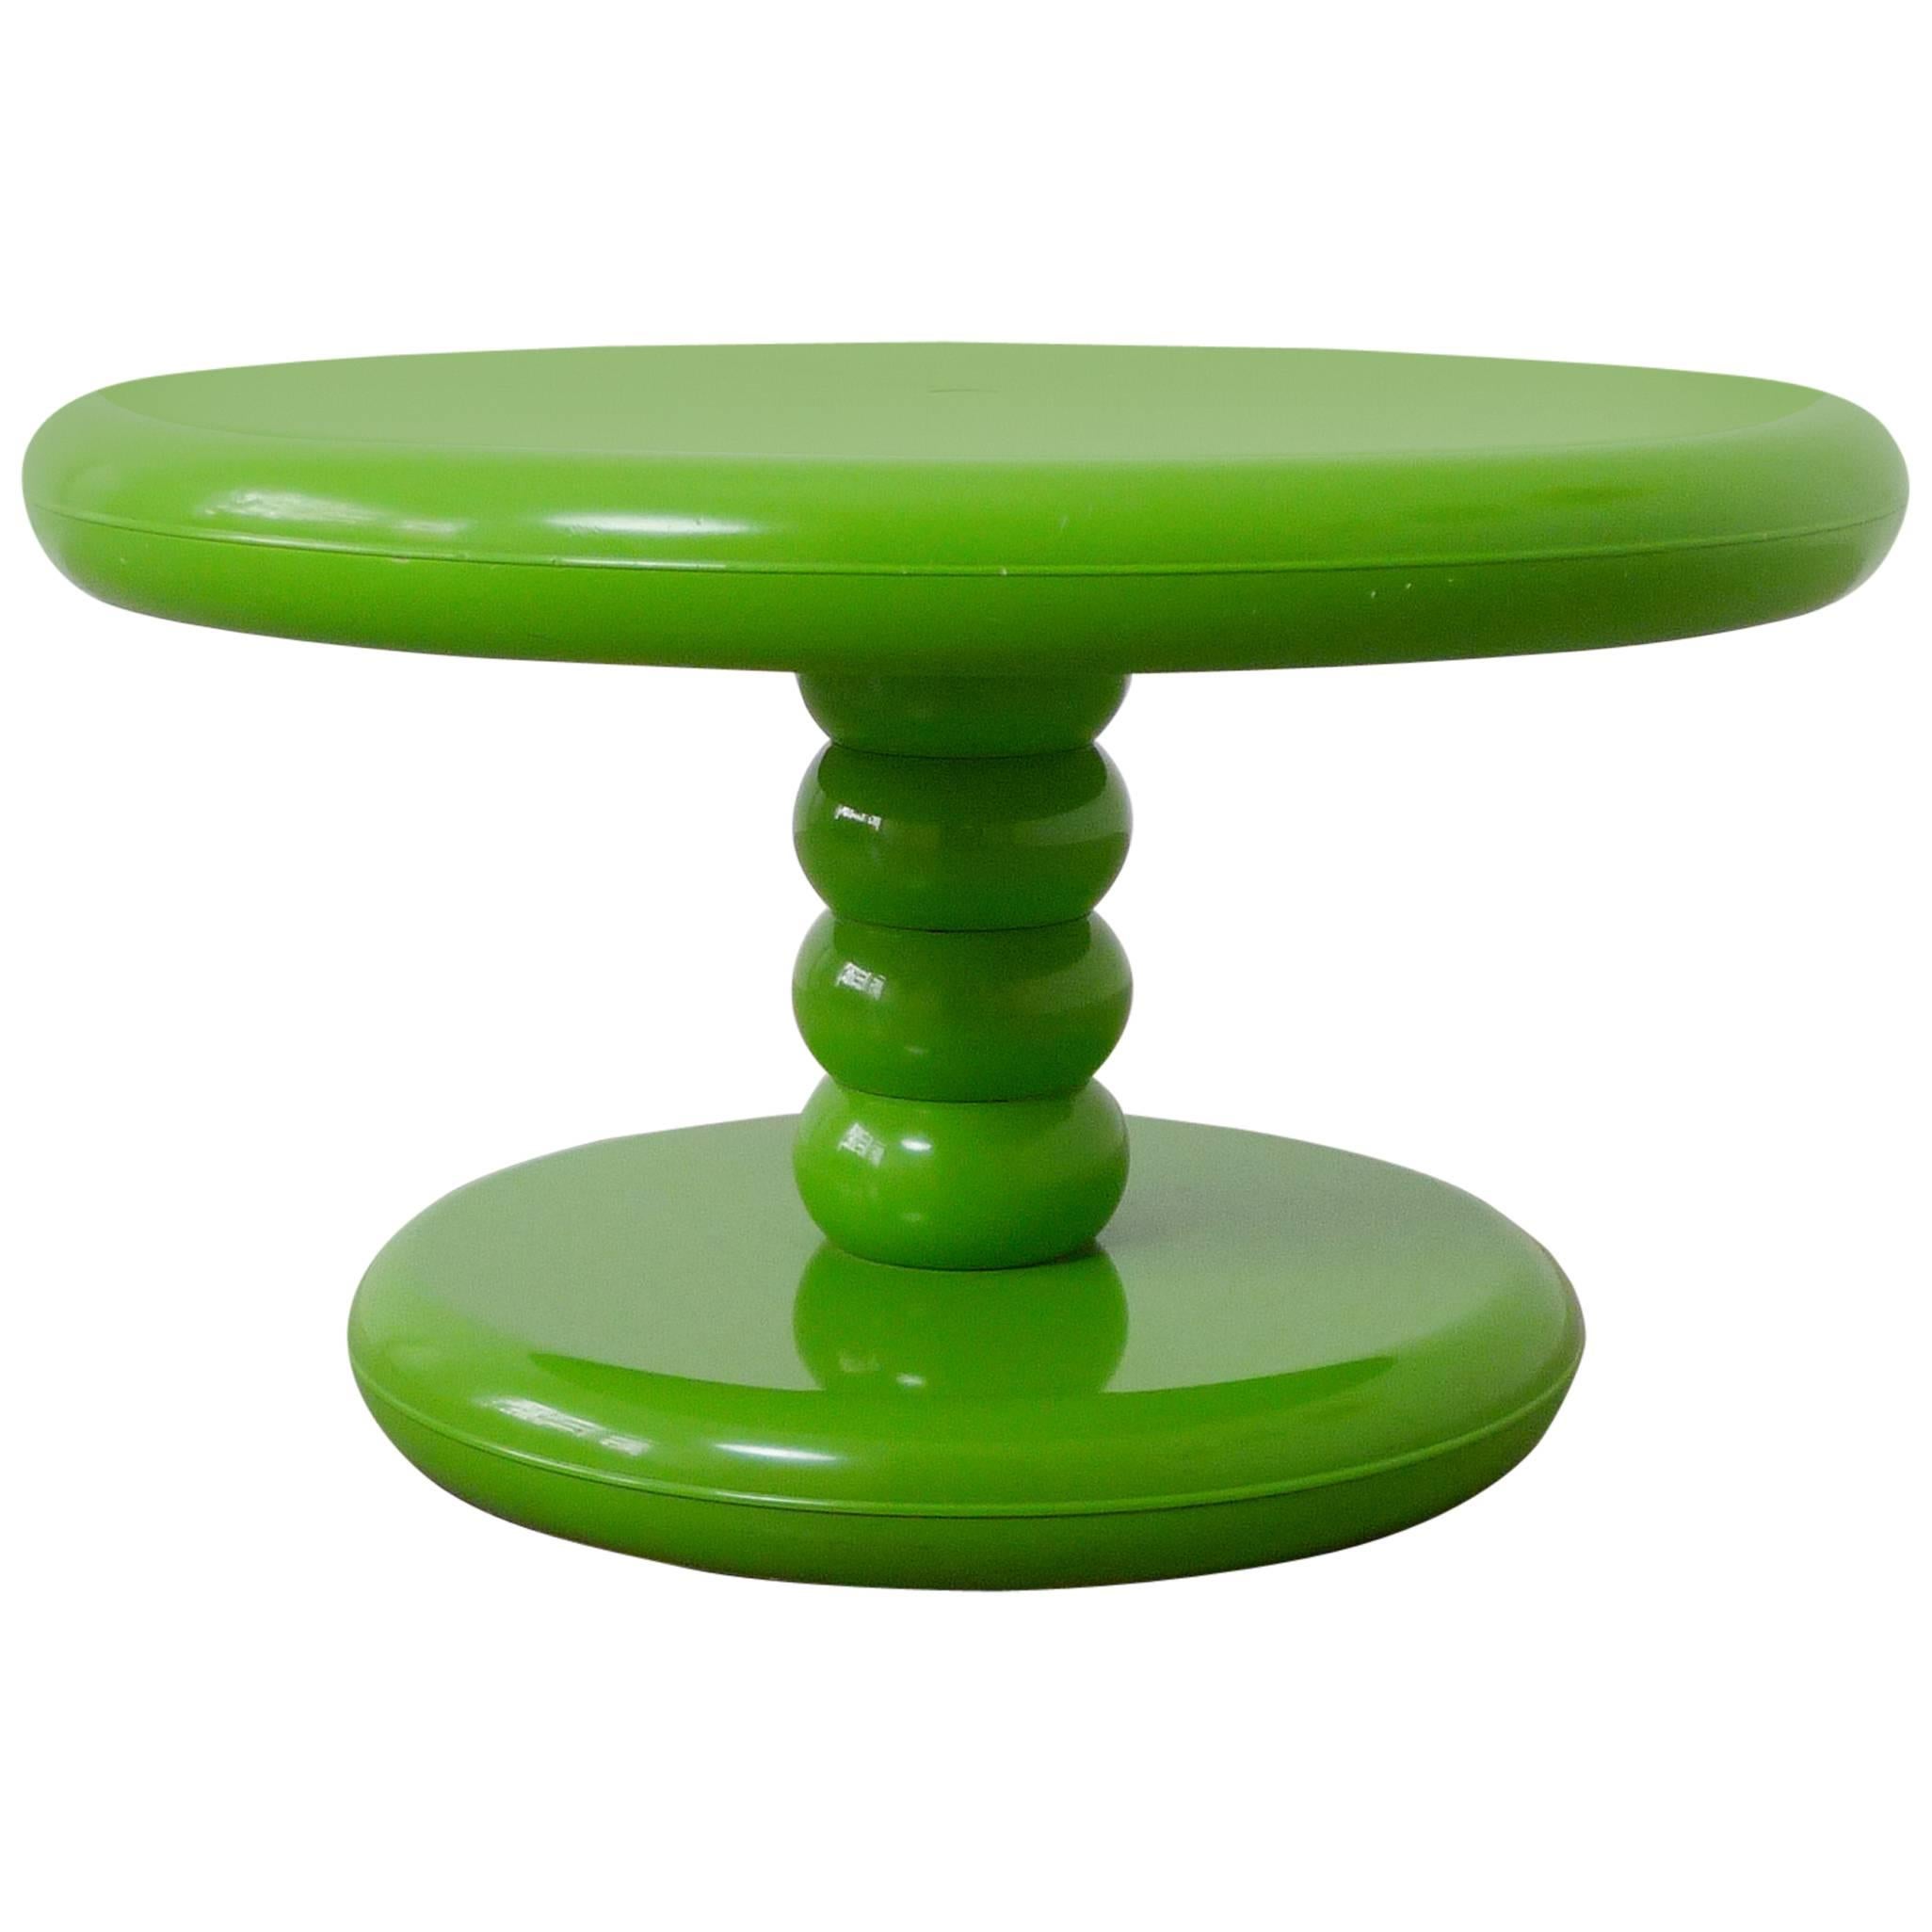 Prototype of a Green Pop Art Table by Peter Ghyczy, Germany, 1970s